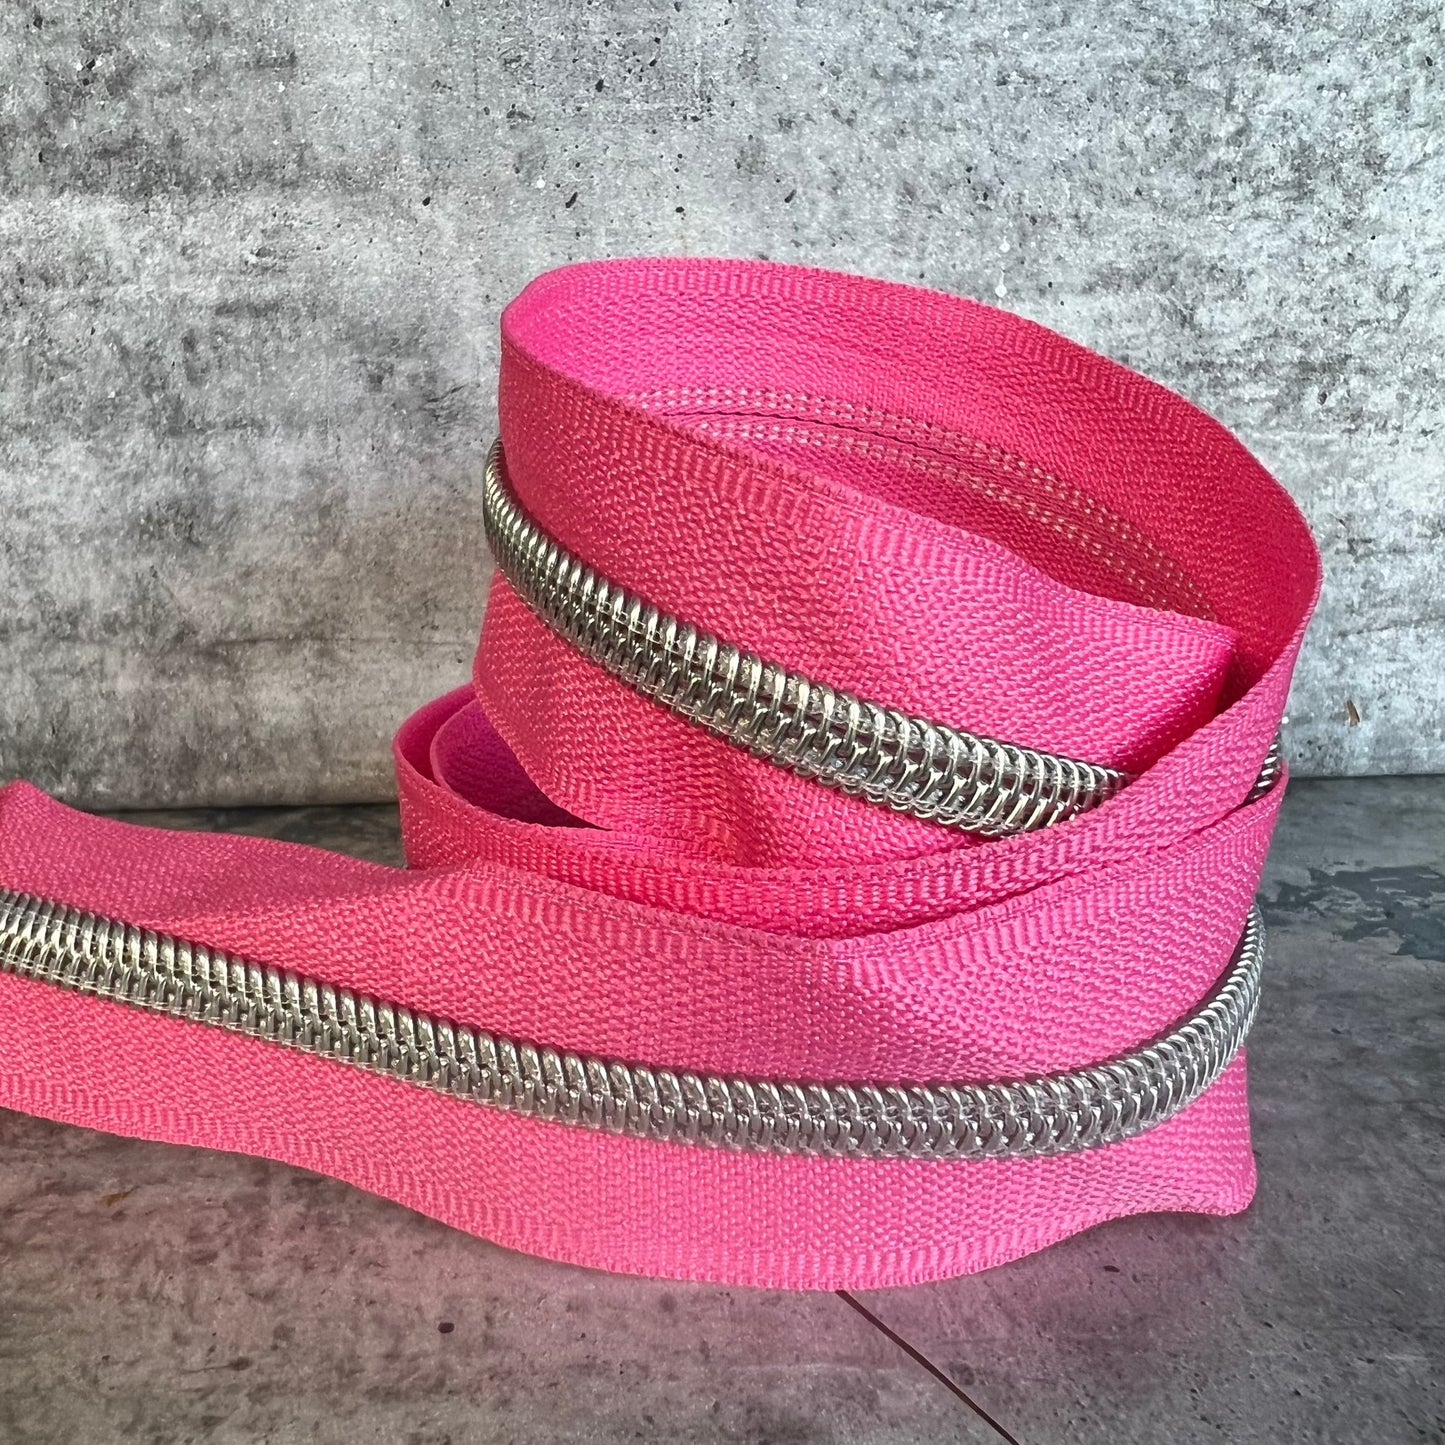 #5 zipper tape pink 3m value pack available